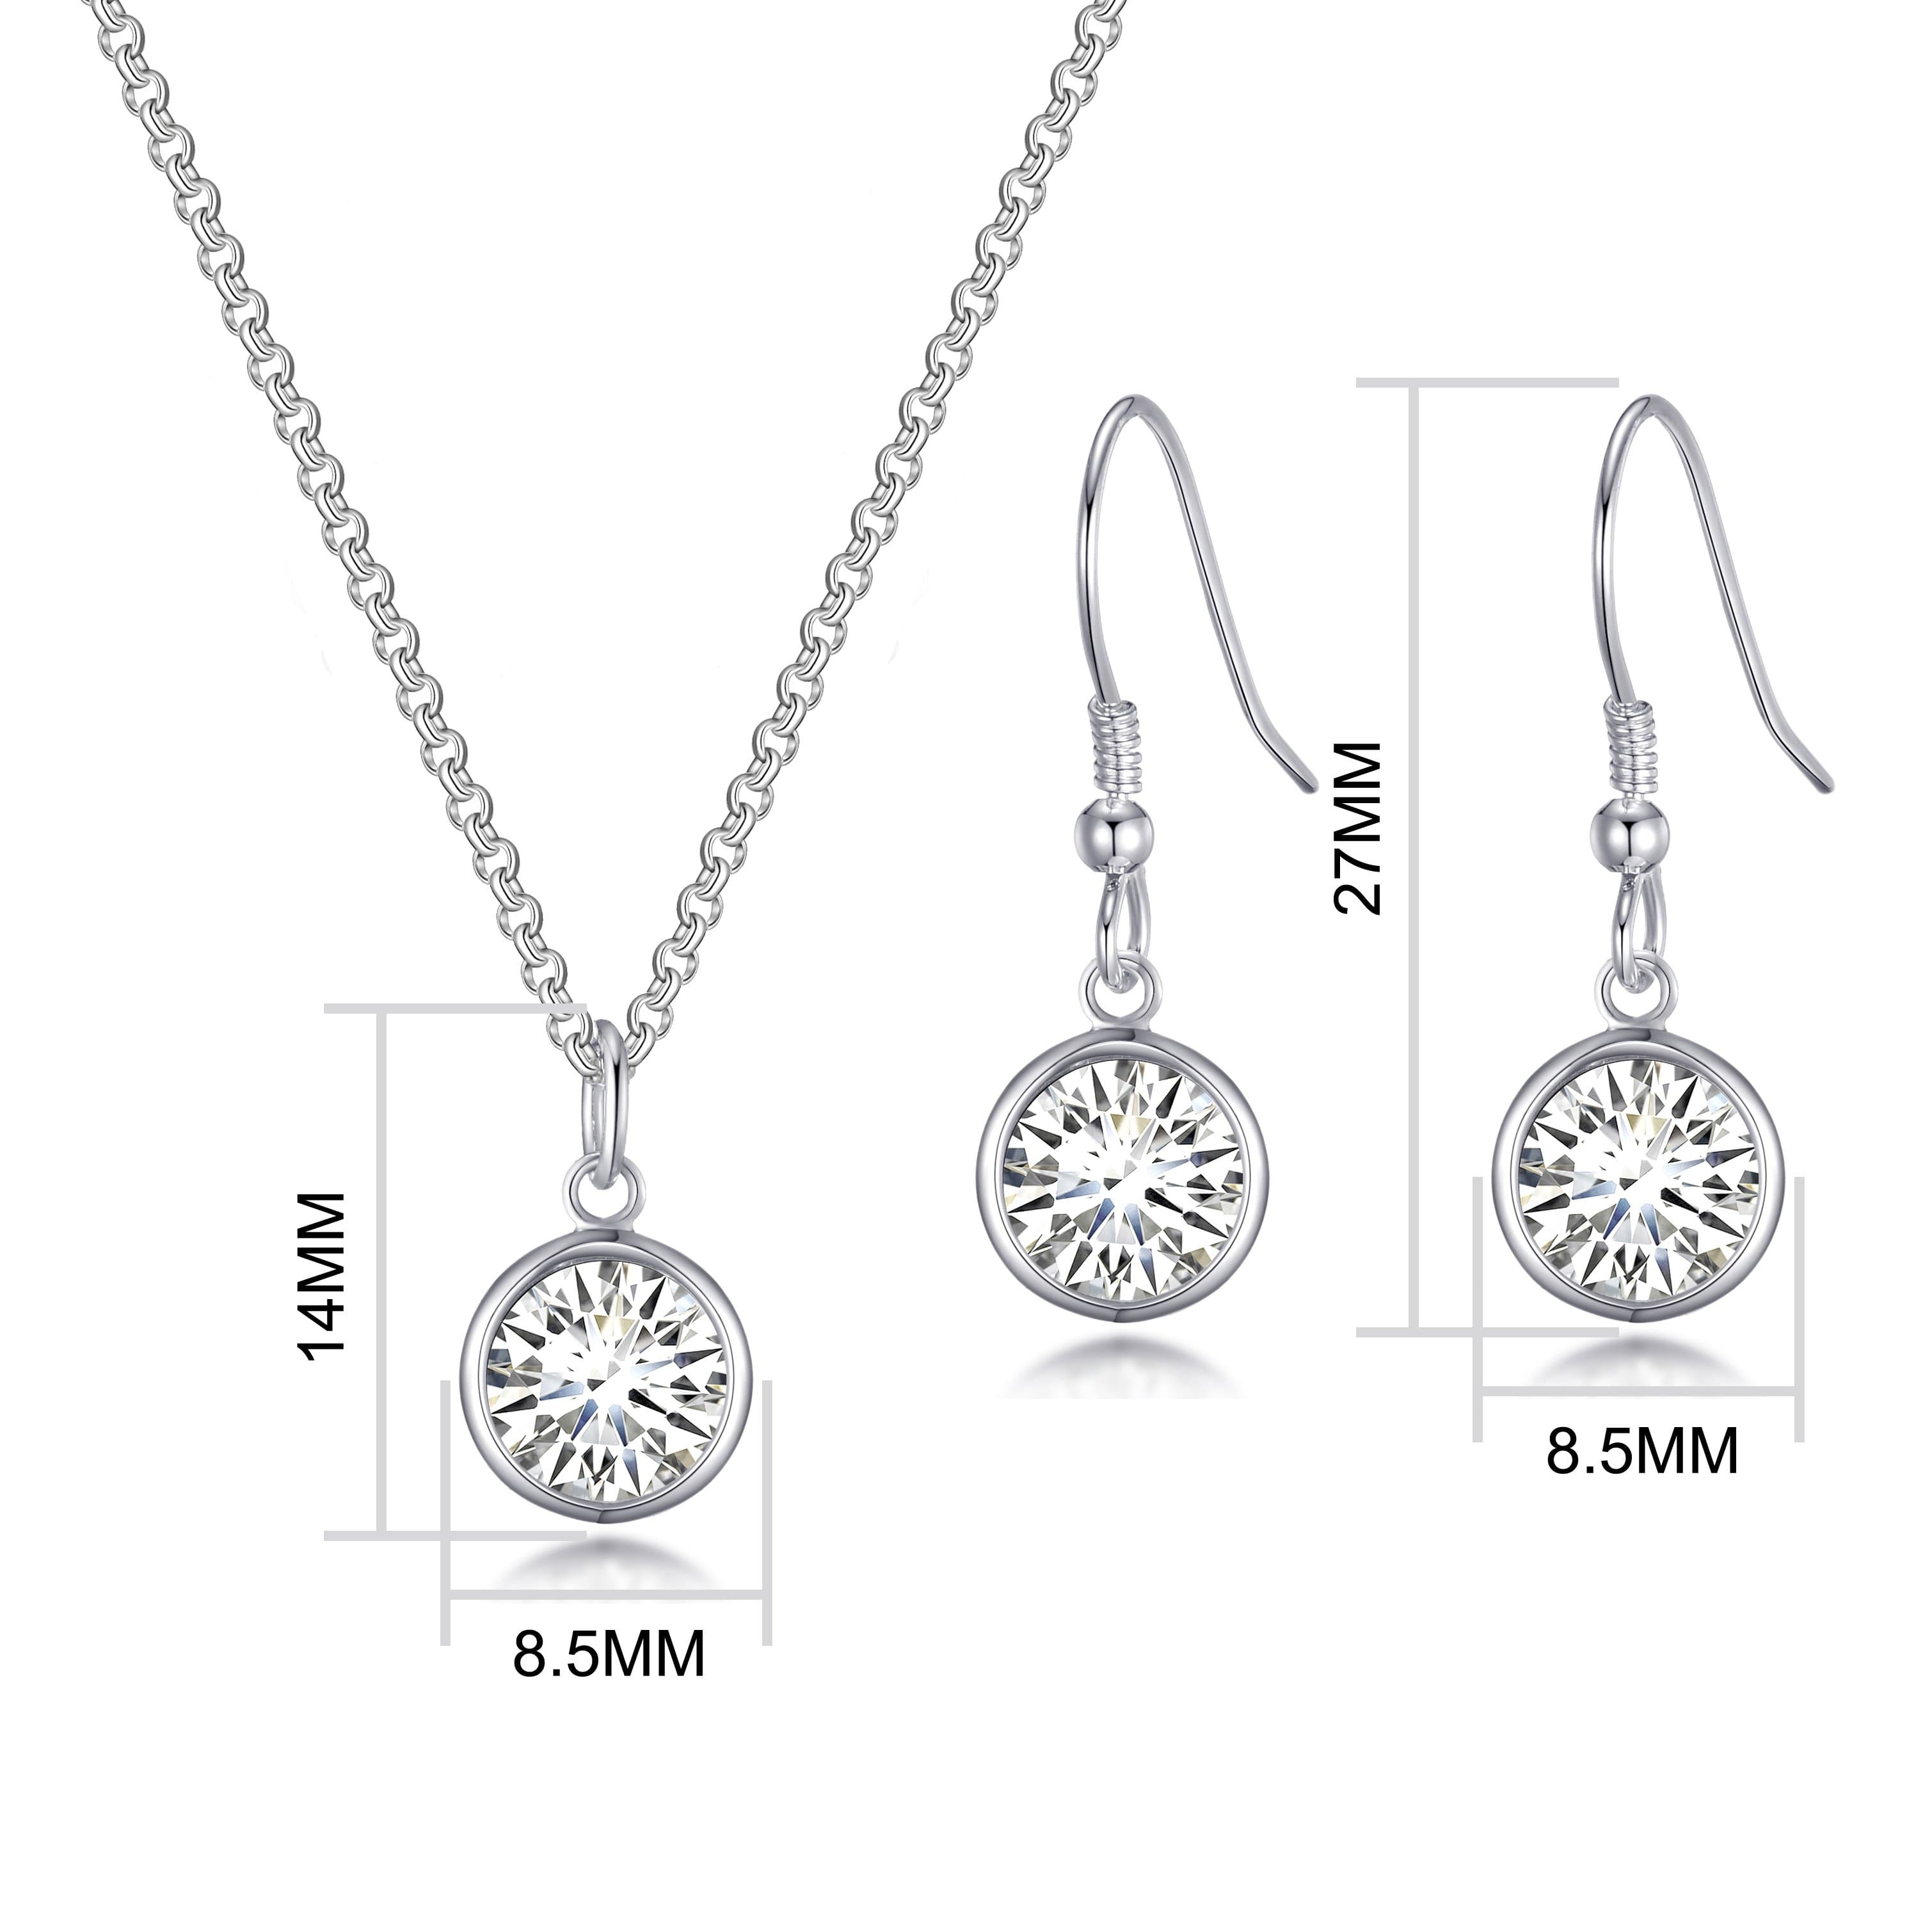 April (Diamond) Birthstone Necklace & Drop Earrings Set Created with Zircondia® Crystals